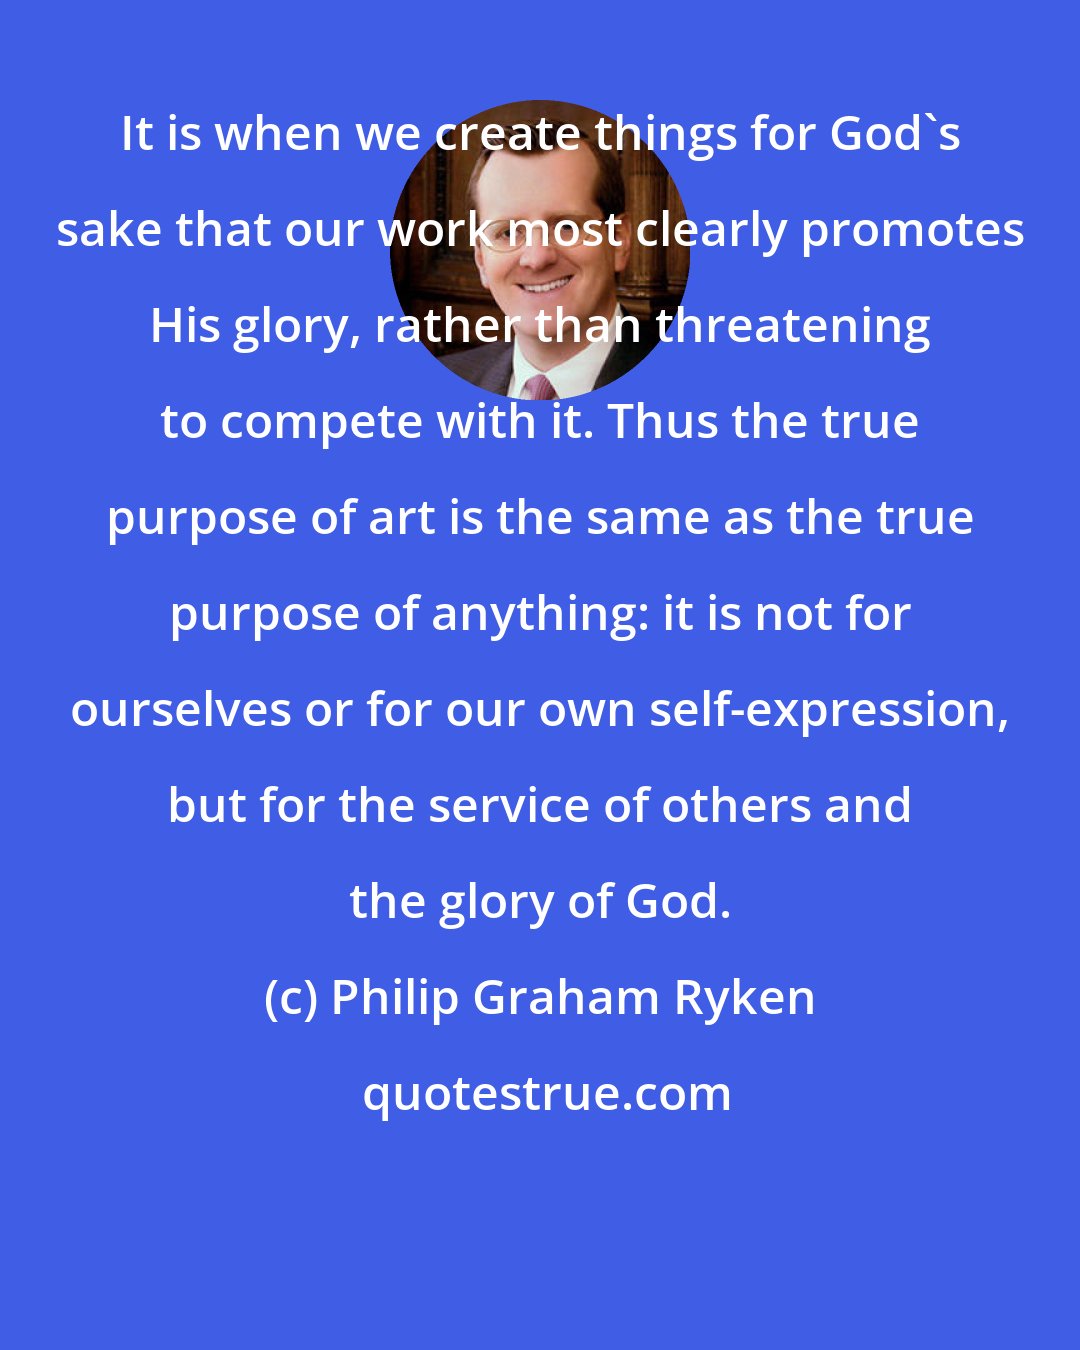 Philip Graham Ryken: It is when we create things for God's sake that our work most clearly promotes His glory, rather than threatening to compete with it. Thus the true purpose of art is the same as the true purpose of anything: it is not for ourselves or for our own self-expression, but for the service of others and the glory of God.